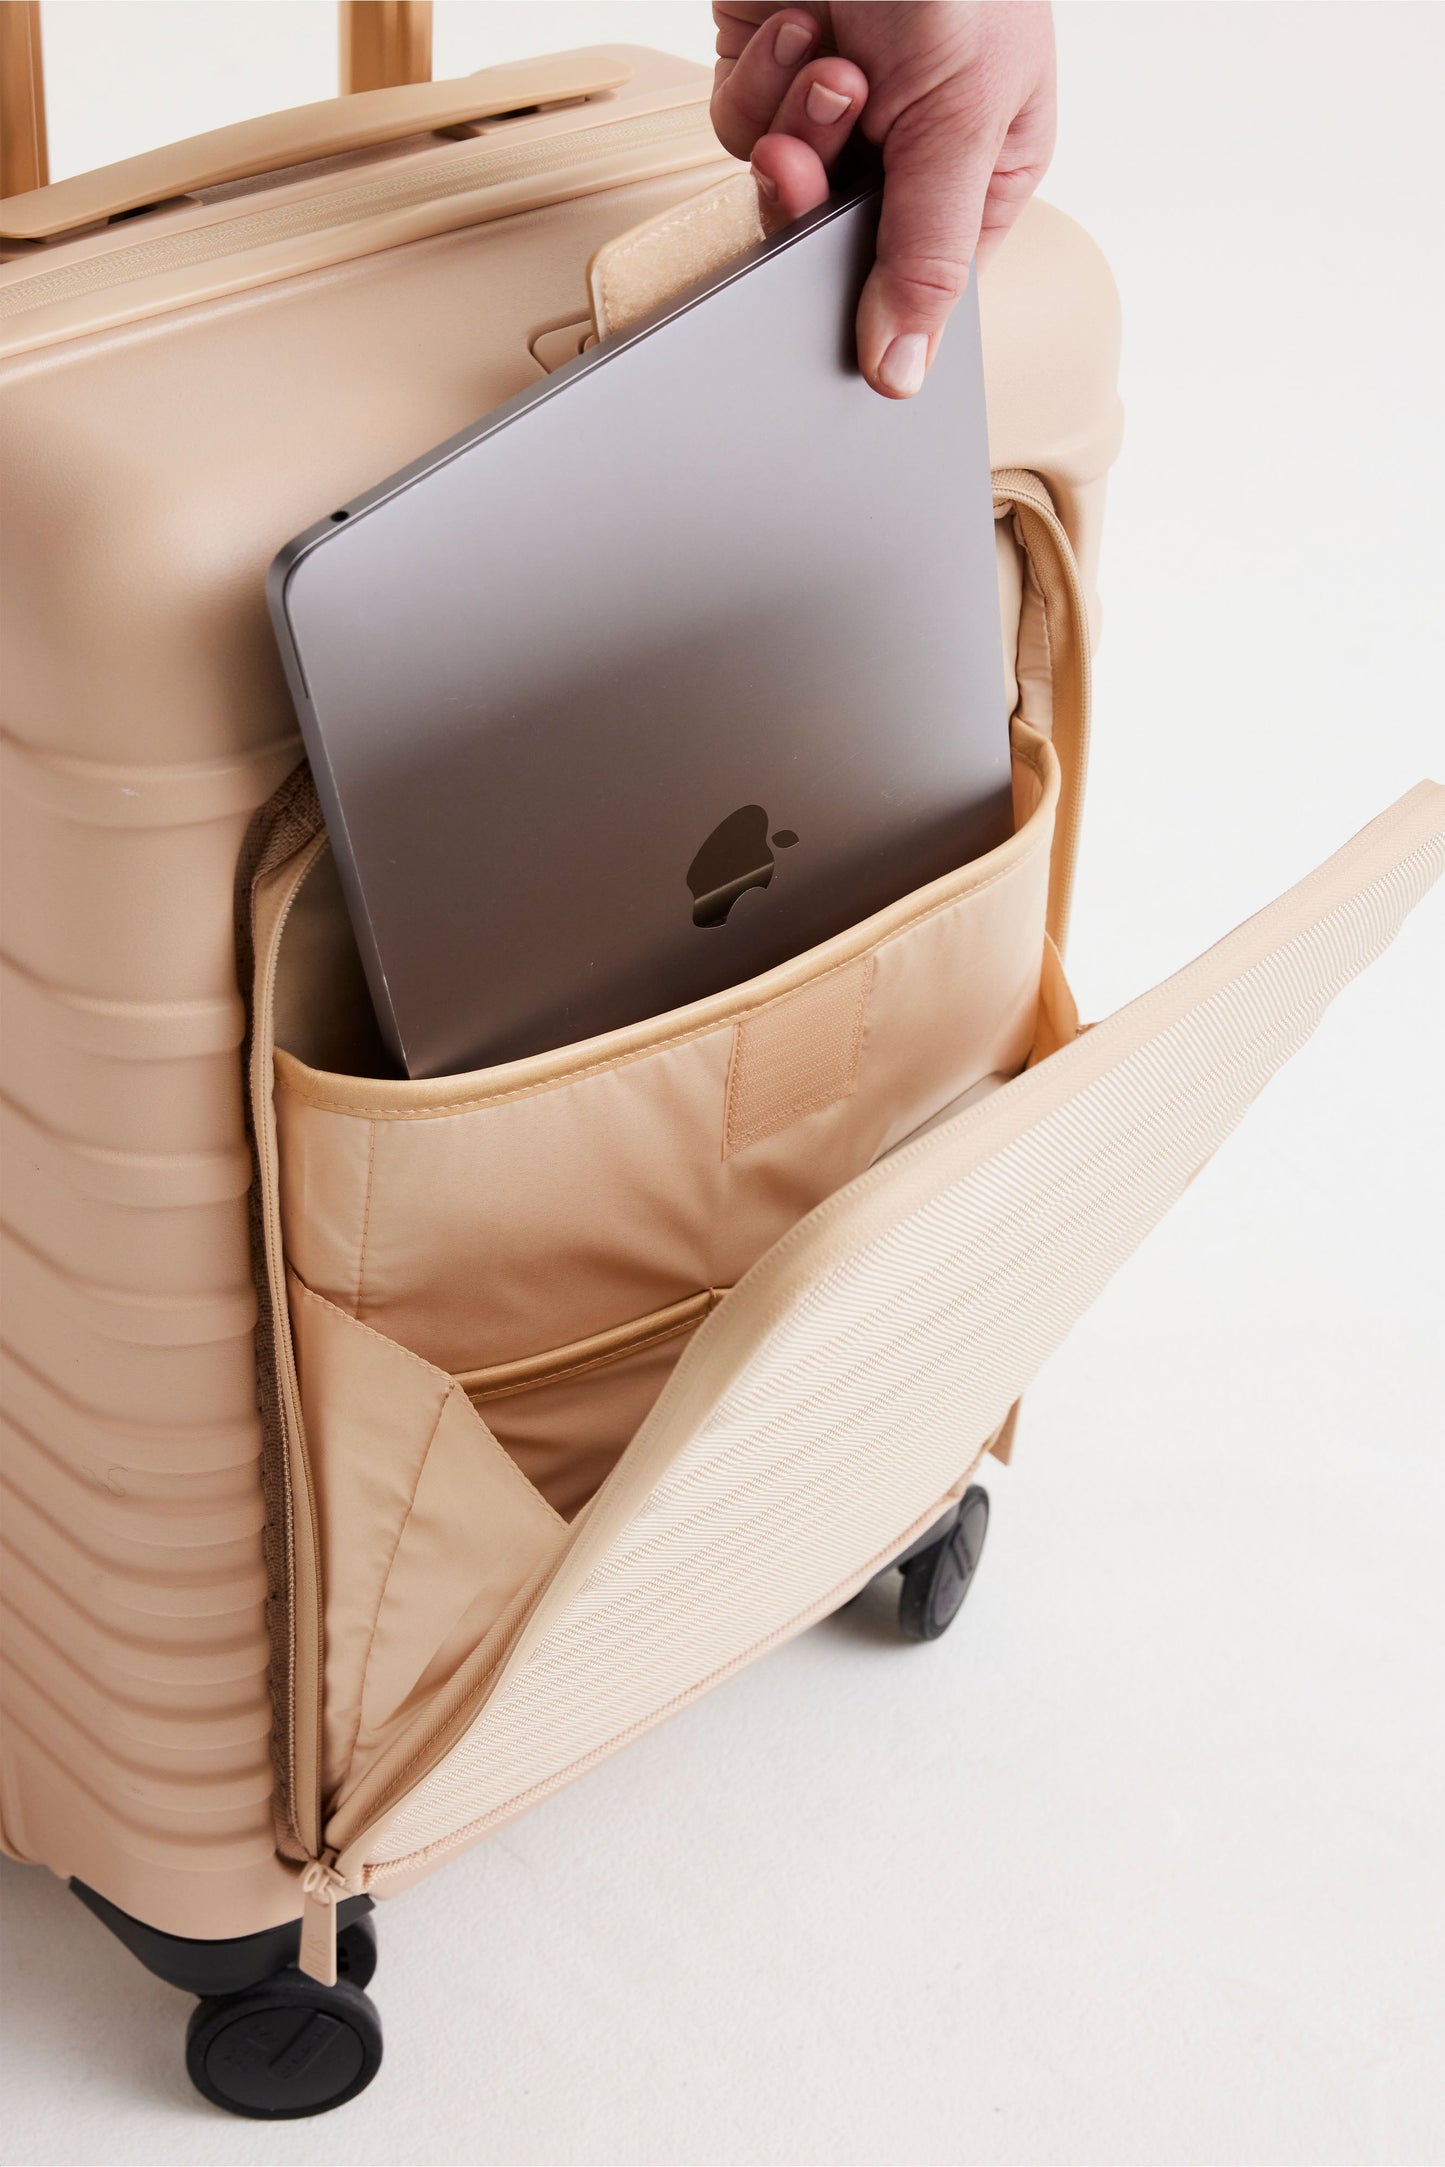 The Front Pocket Carry-On In Beige